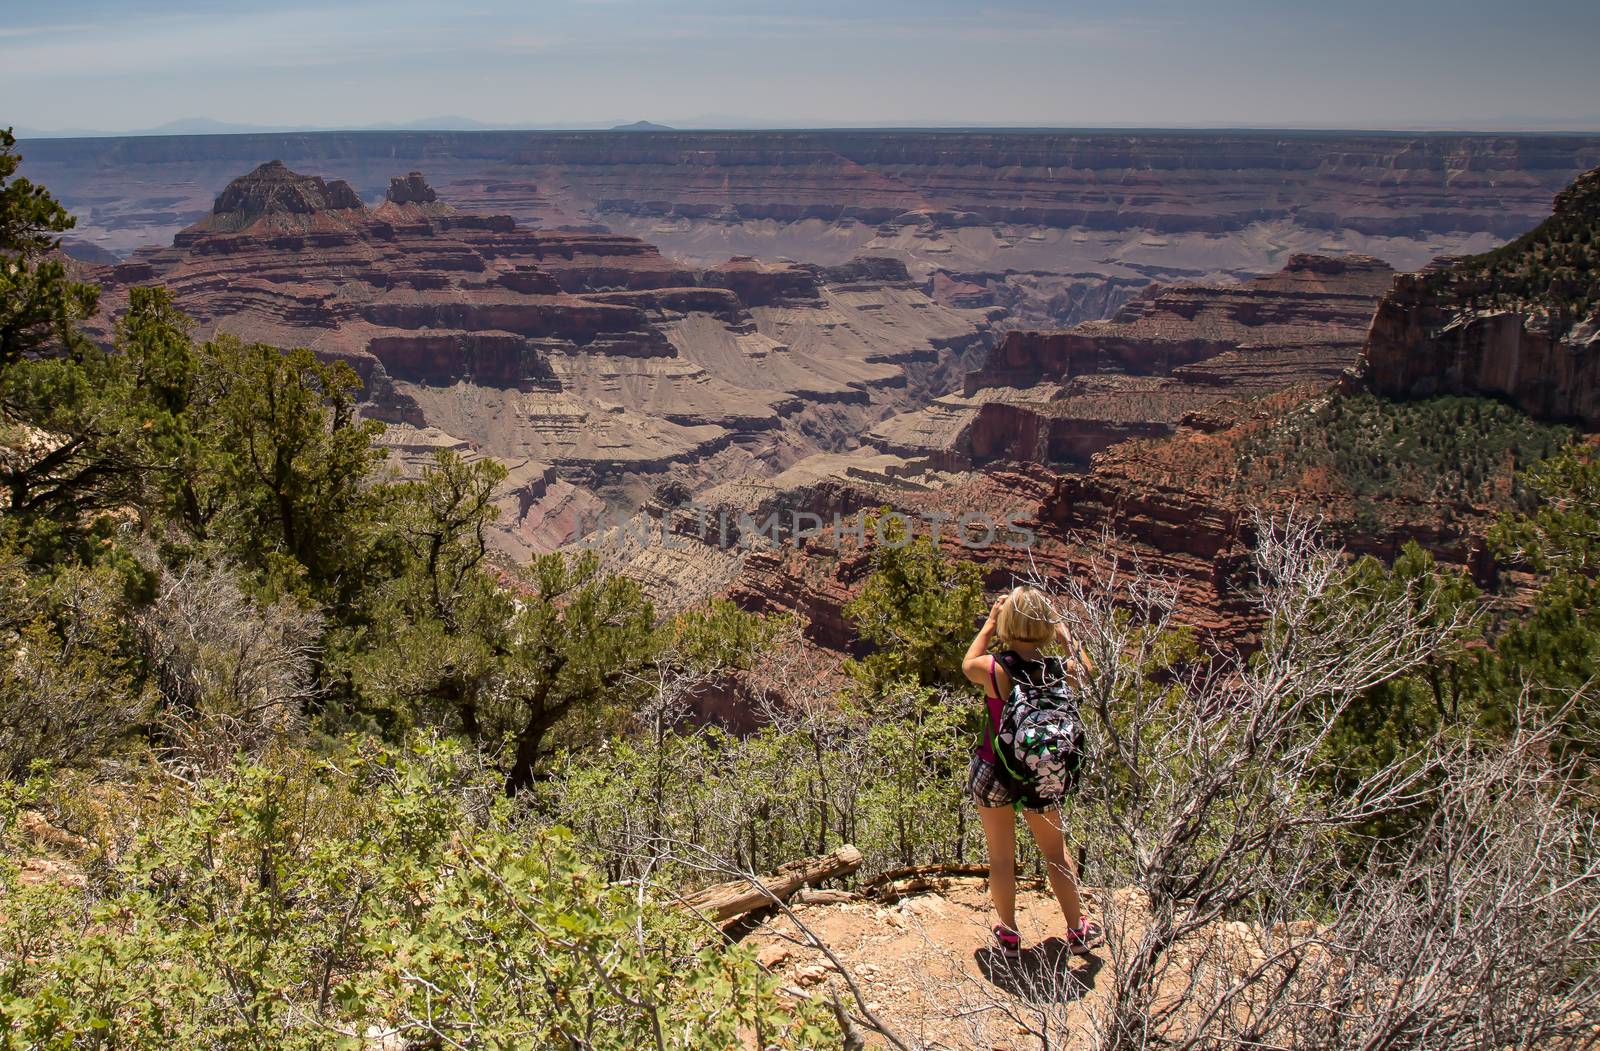 A hiker looks out into the vast wilderness of North Rim of the Grand Canyon National Park, Arizona.